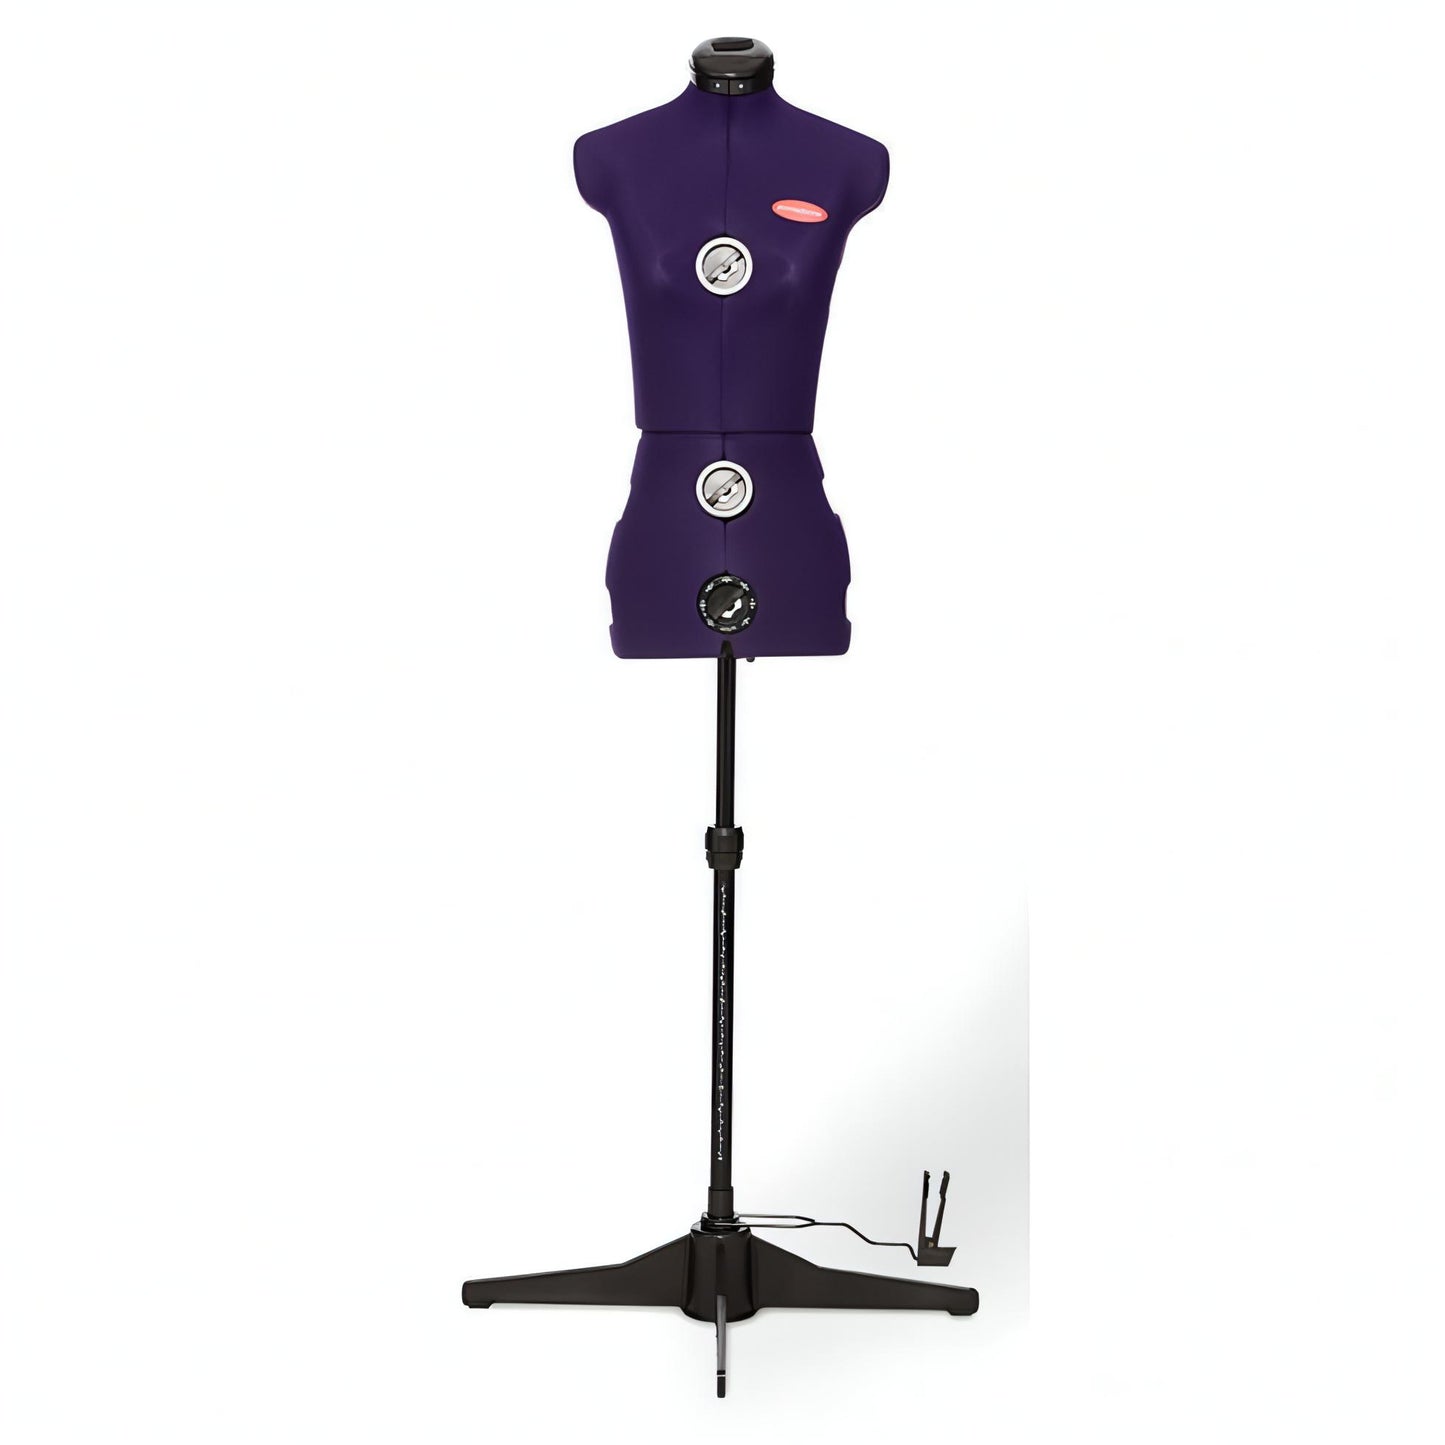 Prym Prymadonna Dress Form - 8 part adjustable Tailors Dummy with 13 adjustments (available in 4 sizes)